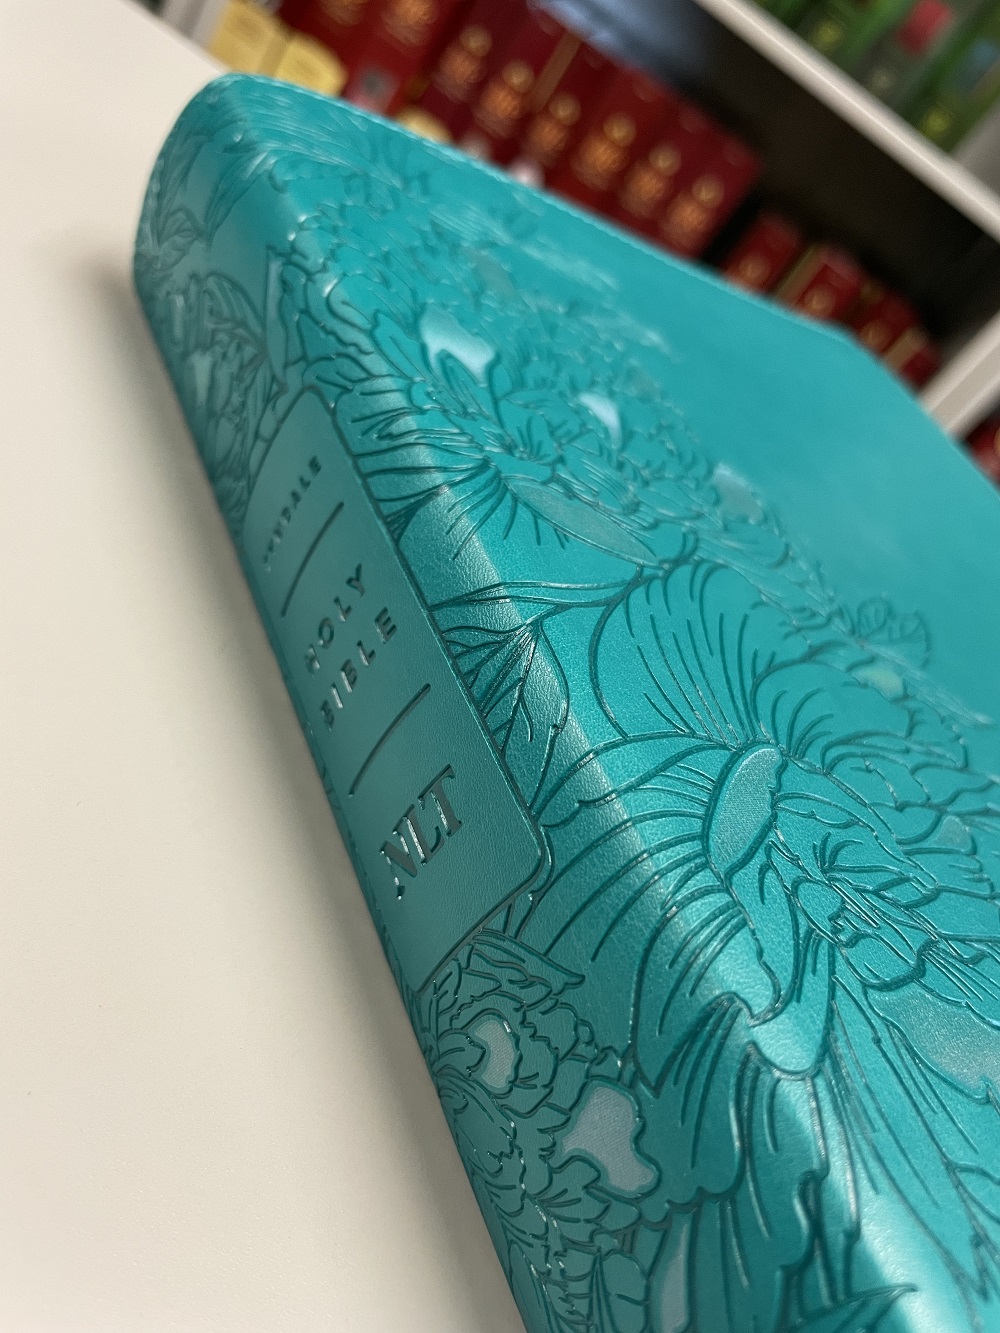 super-giant-print-teal-smaller-tyndale-bibles